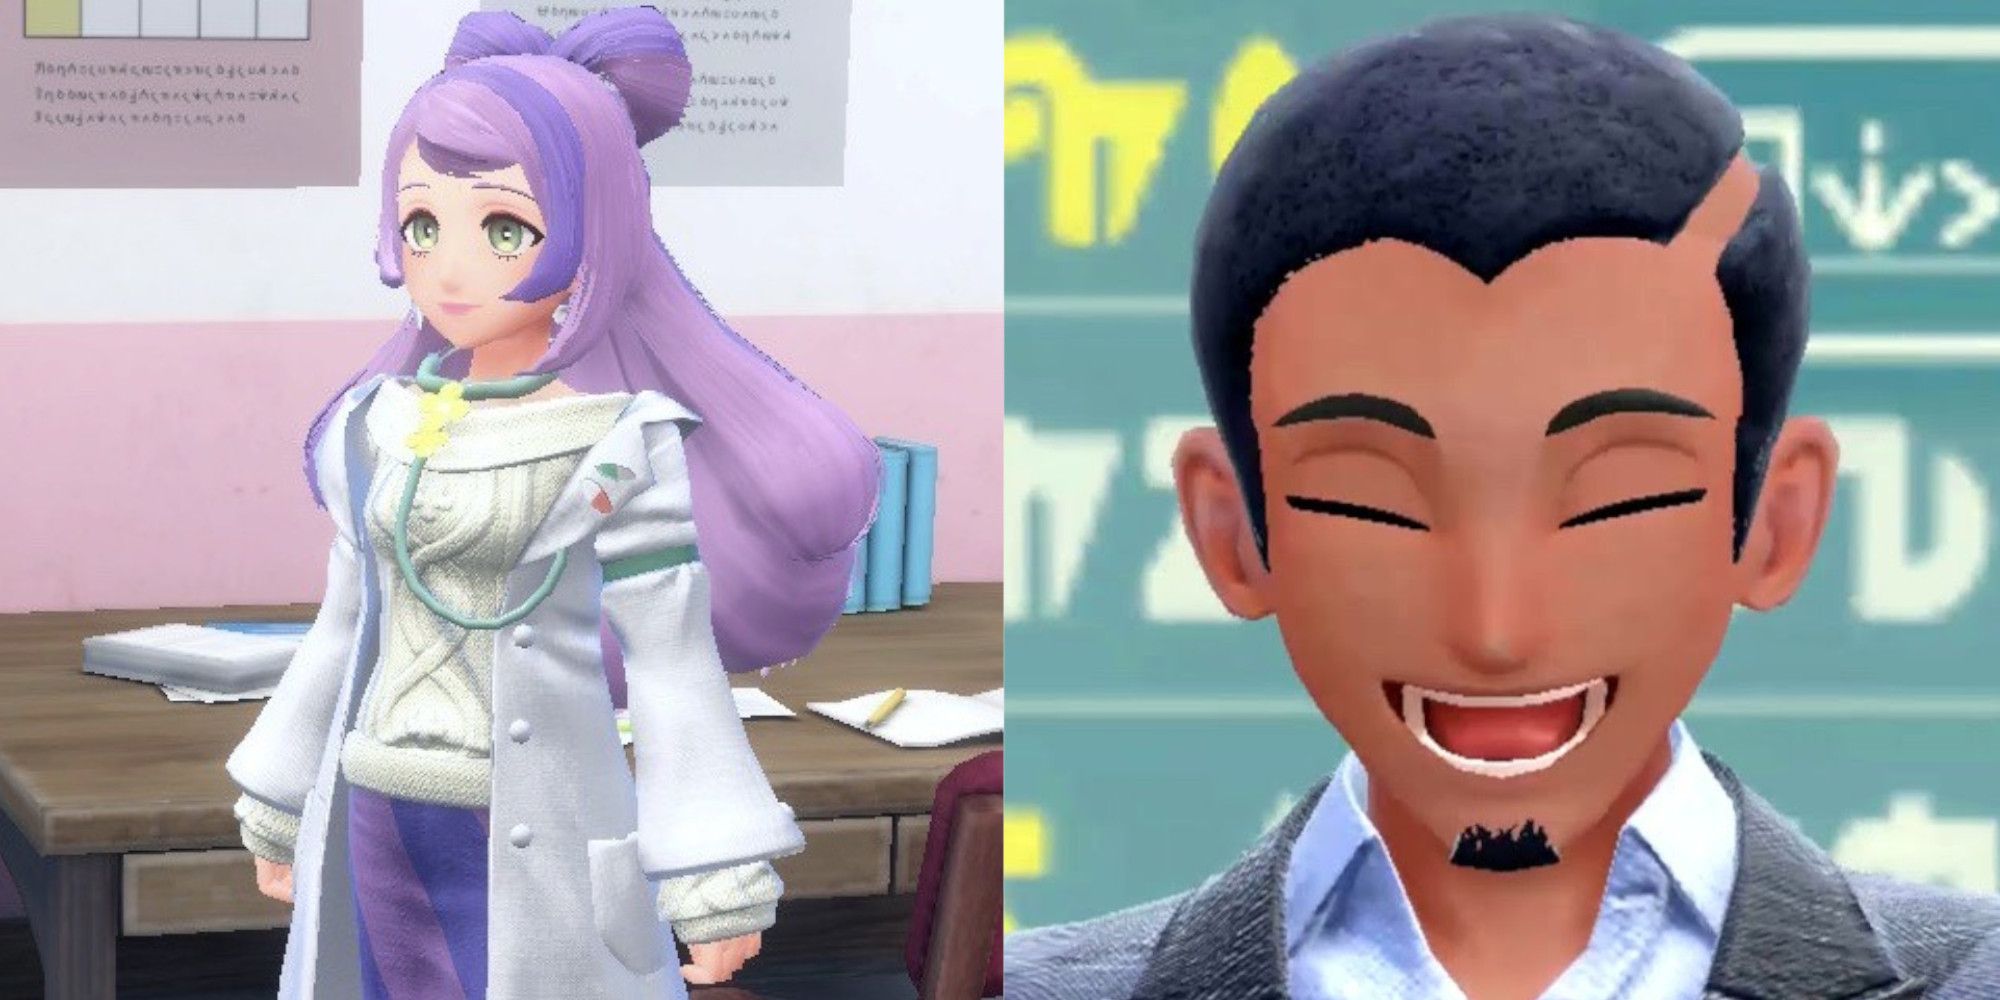 Miriam and Mr. Salvatore in Pokemon Scarlet and Violet